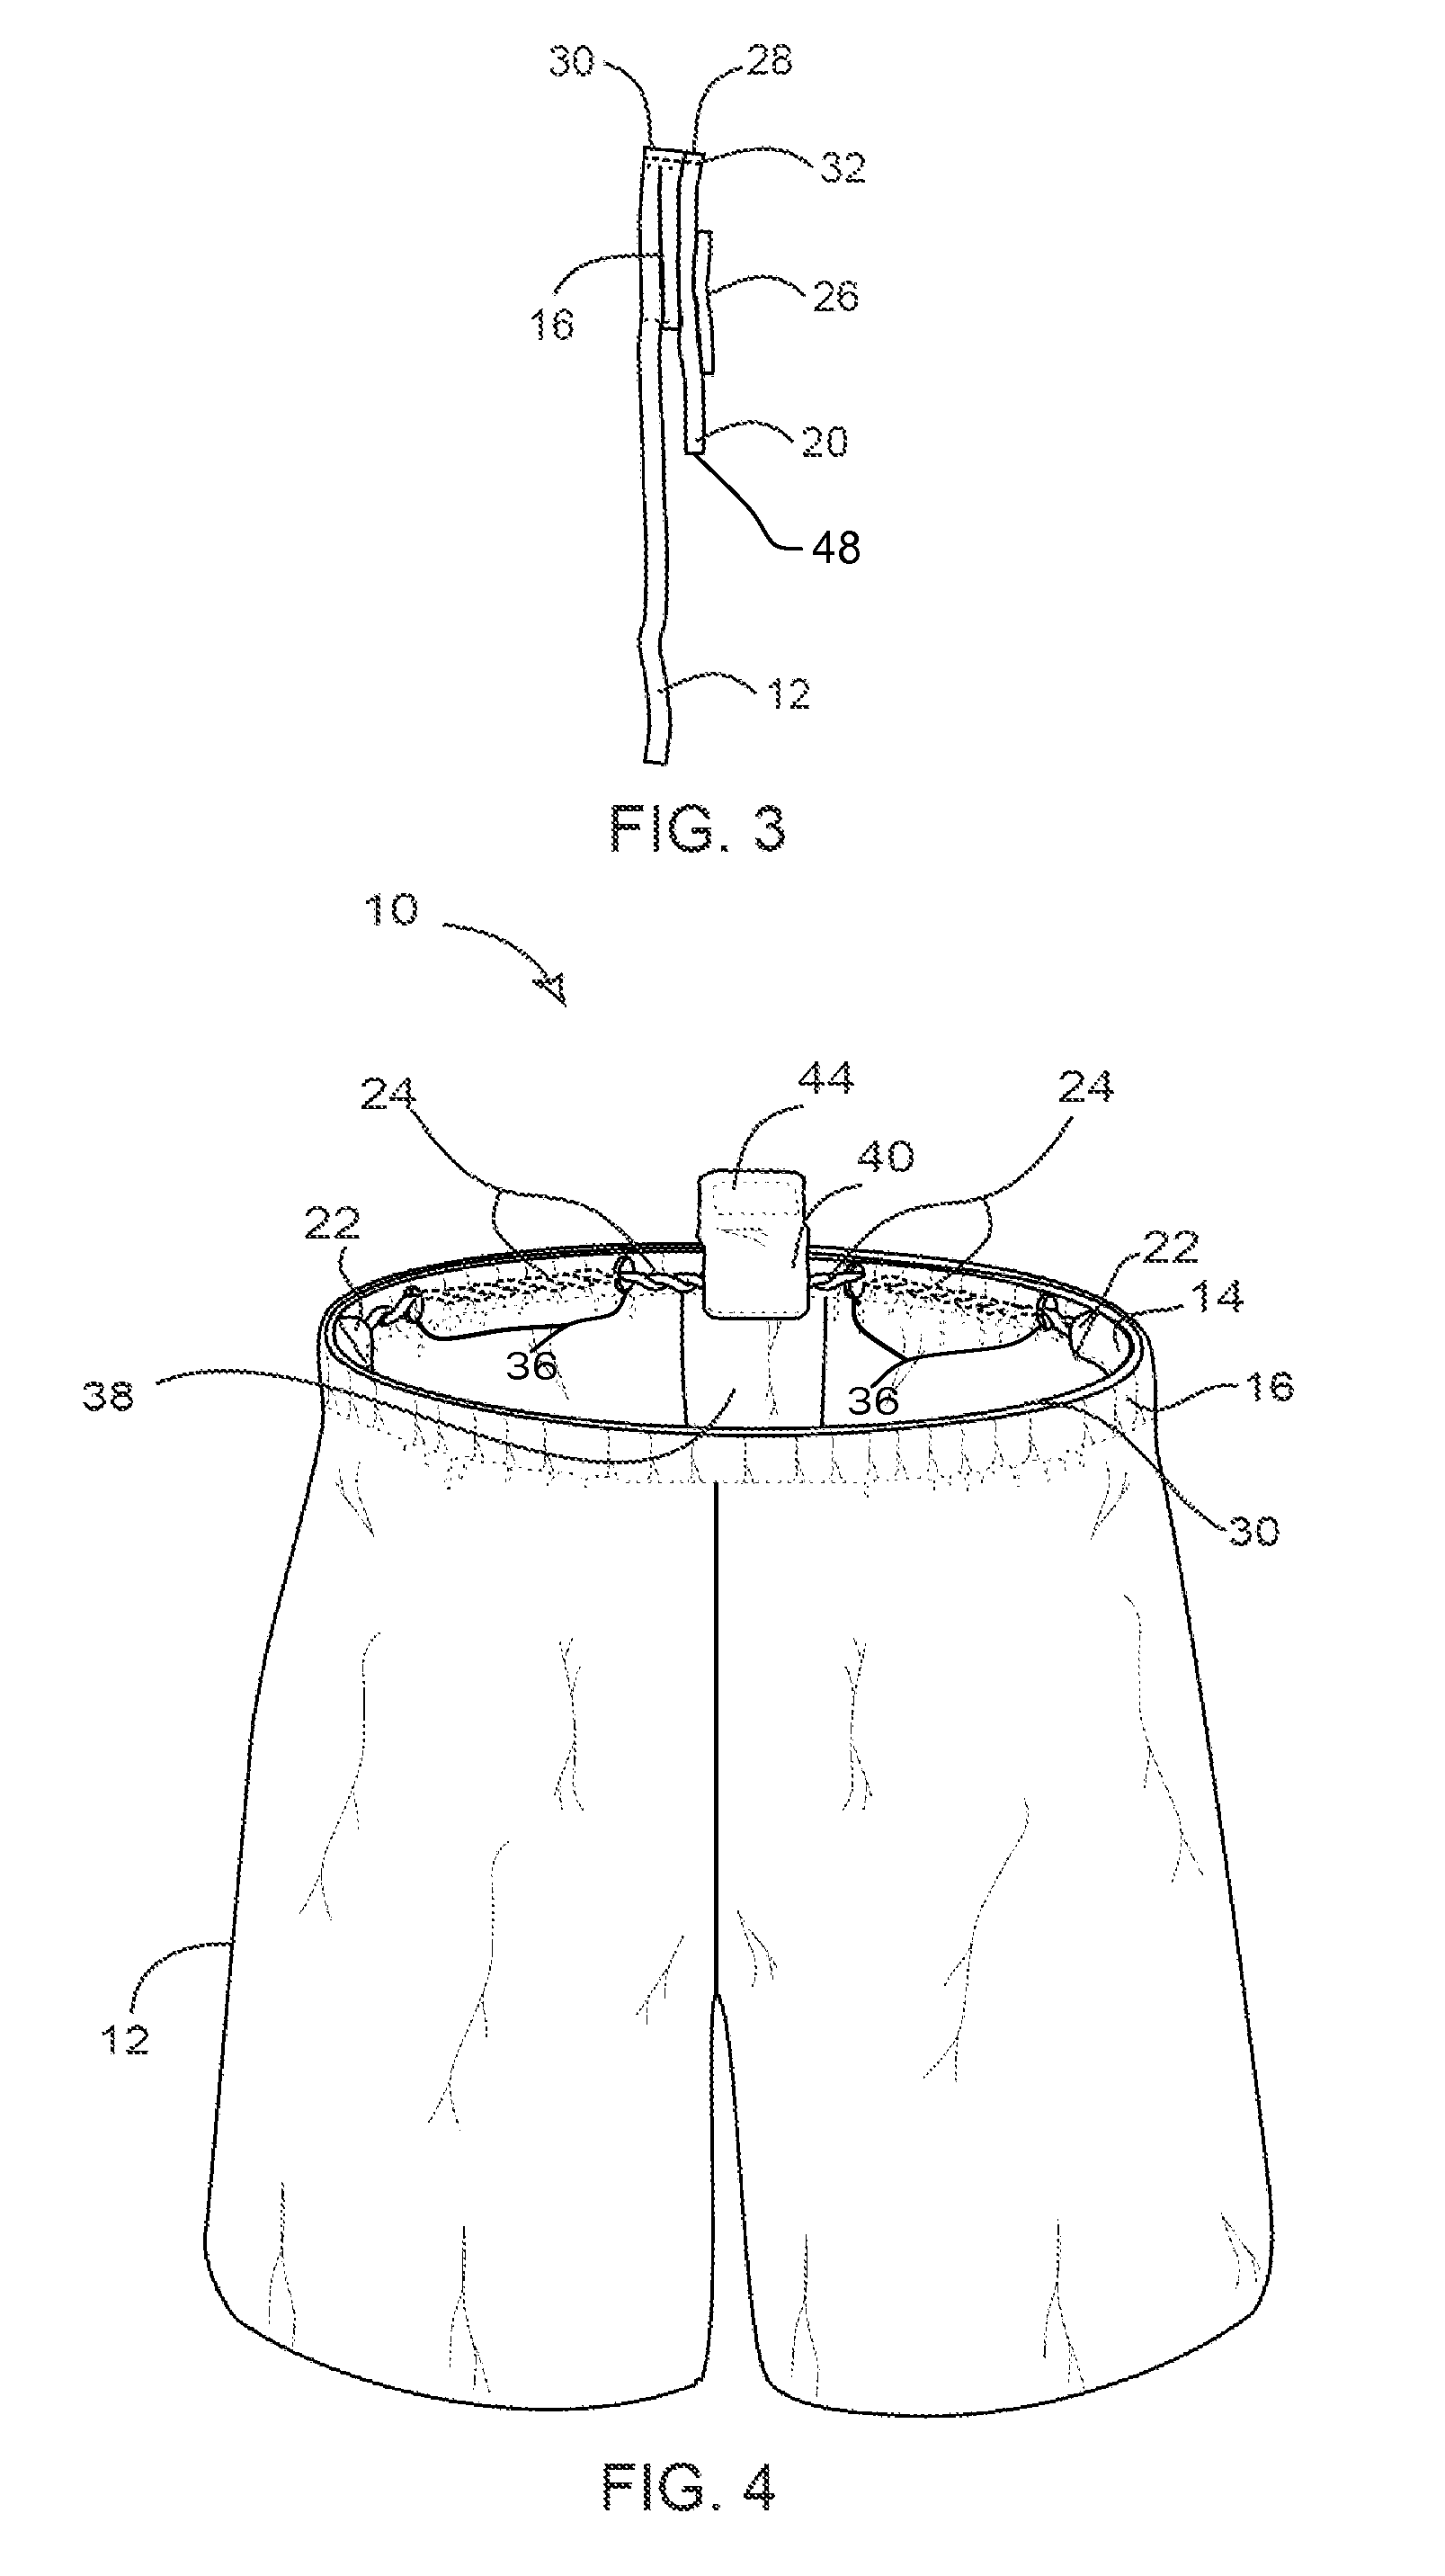 Lower-body garment having a secure waist assembly